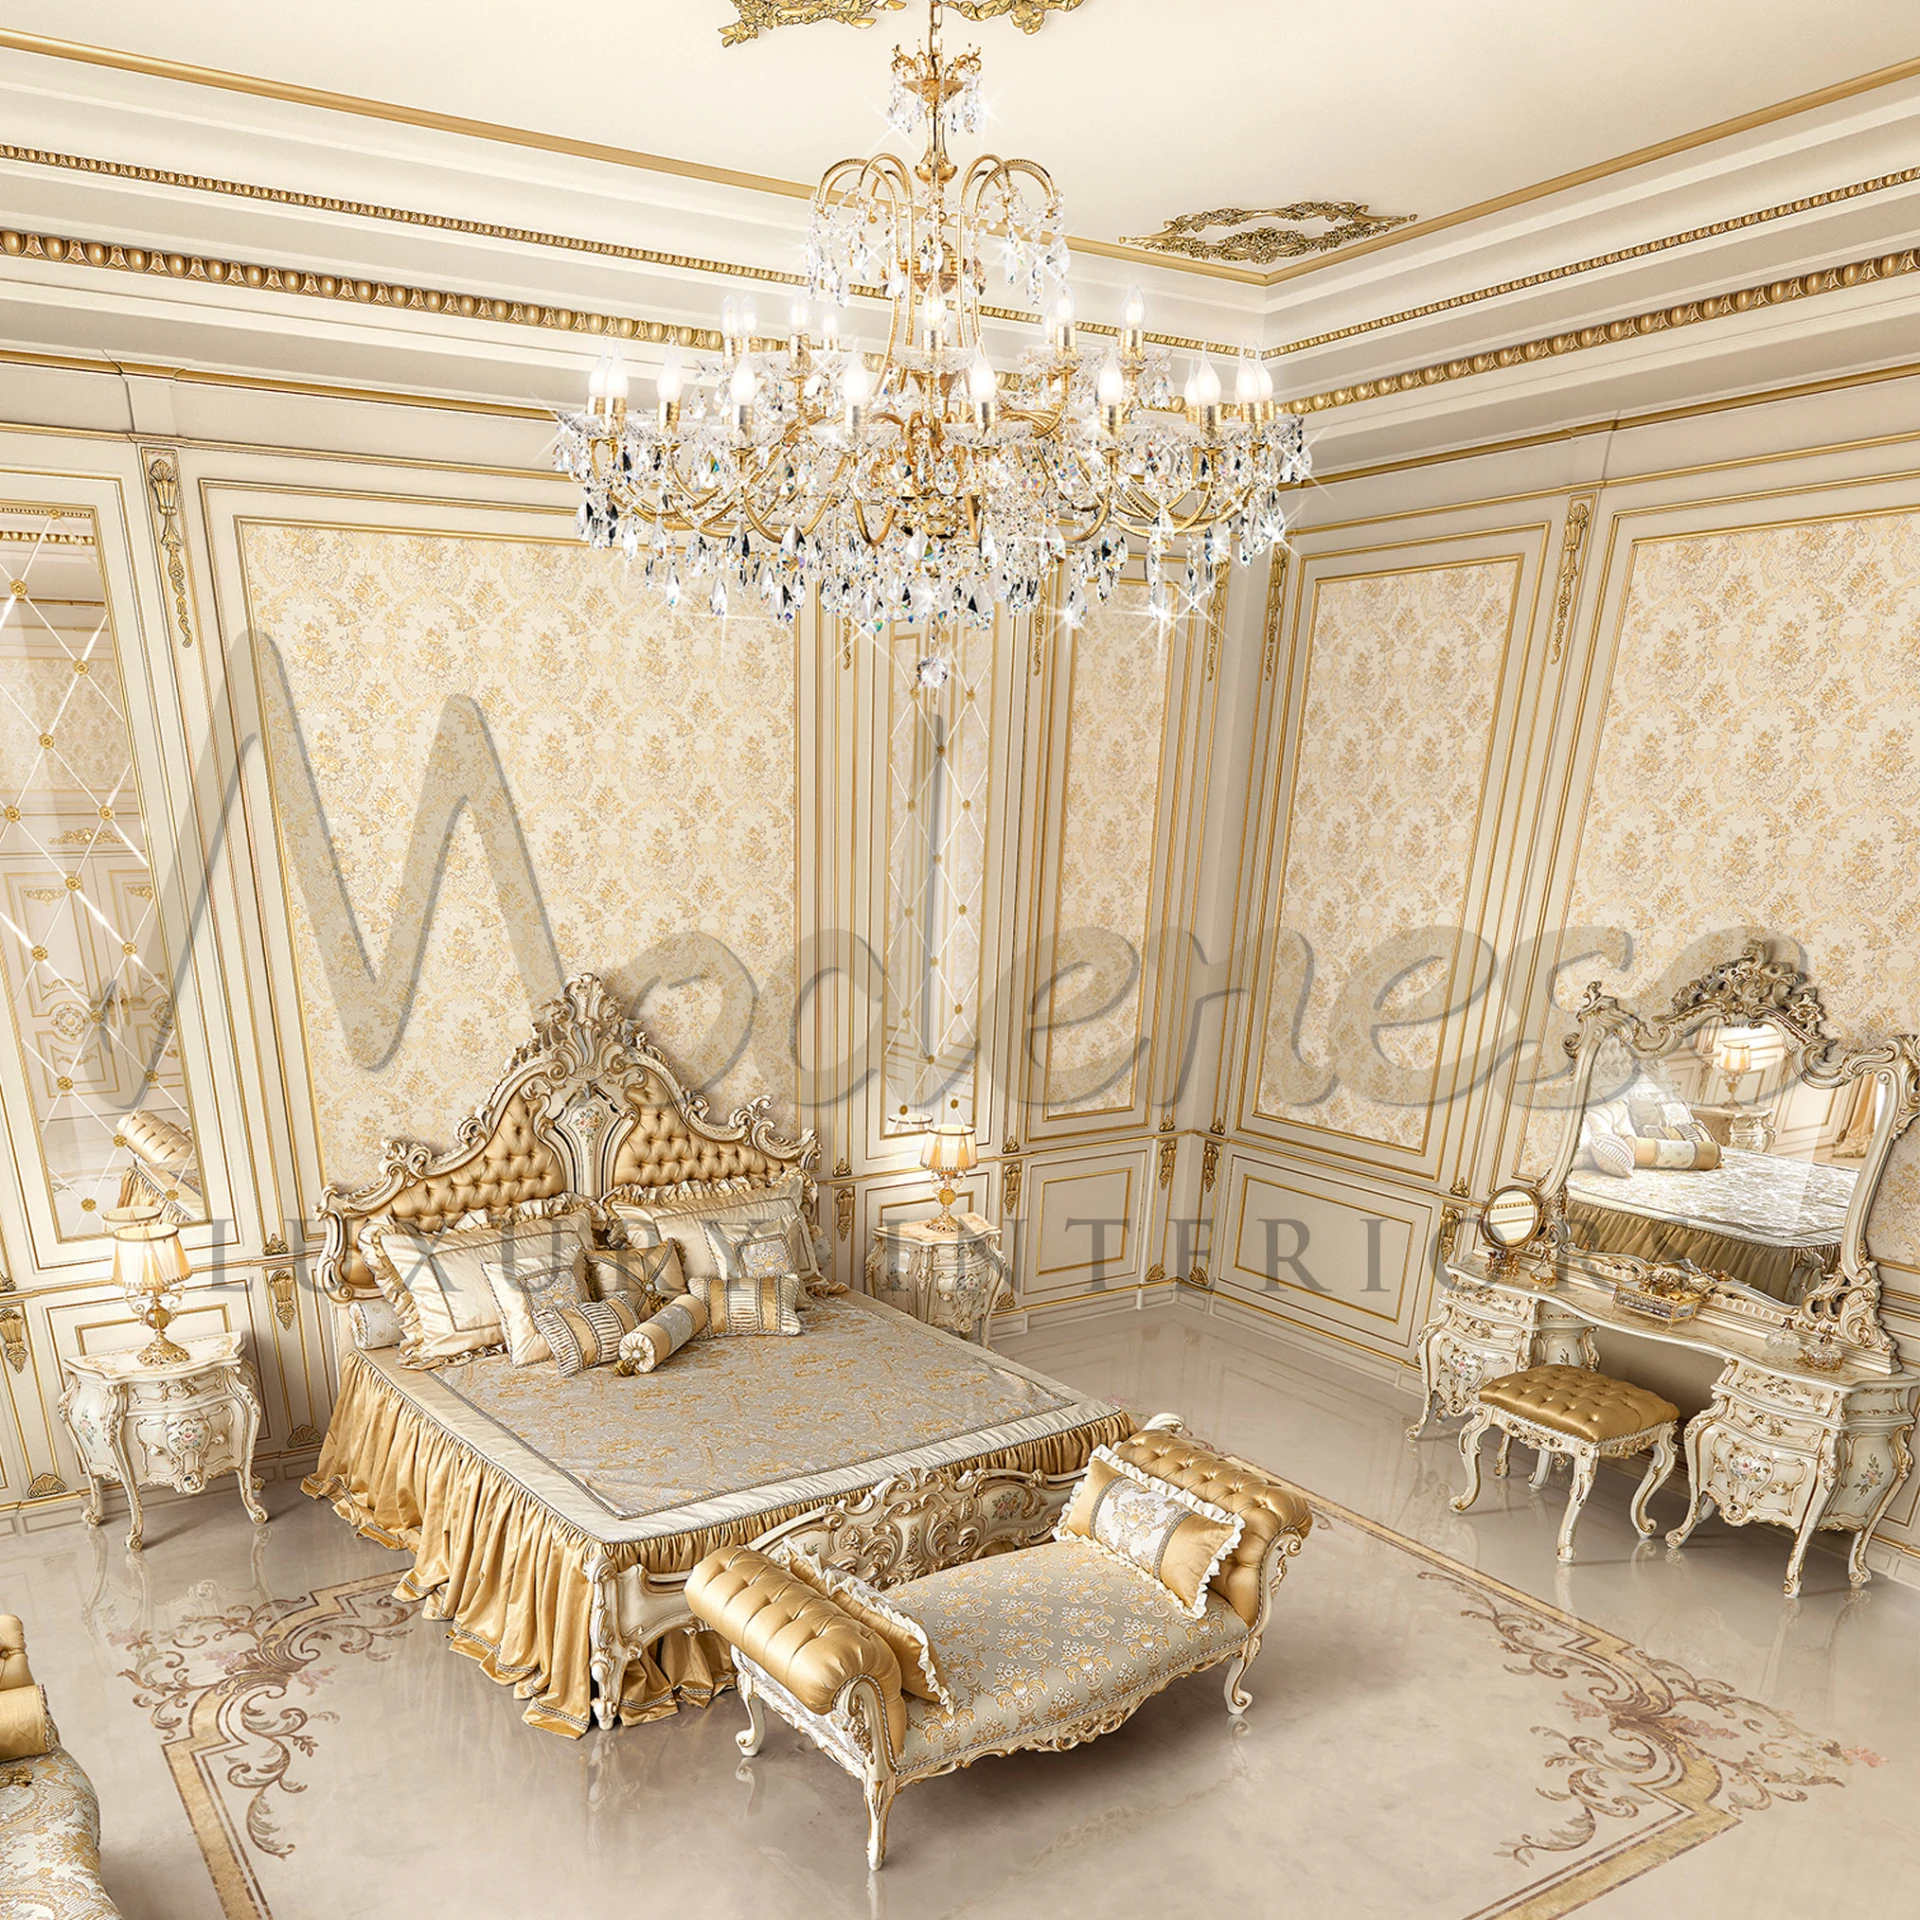 Luxury bedroom decor showcasing a lavish bed, intricate furniture with luxury Italianchandelier.